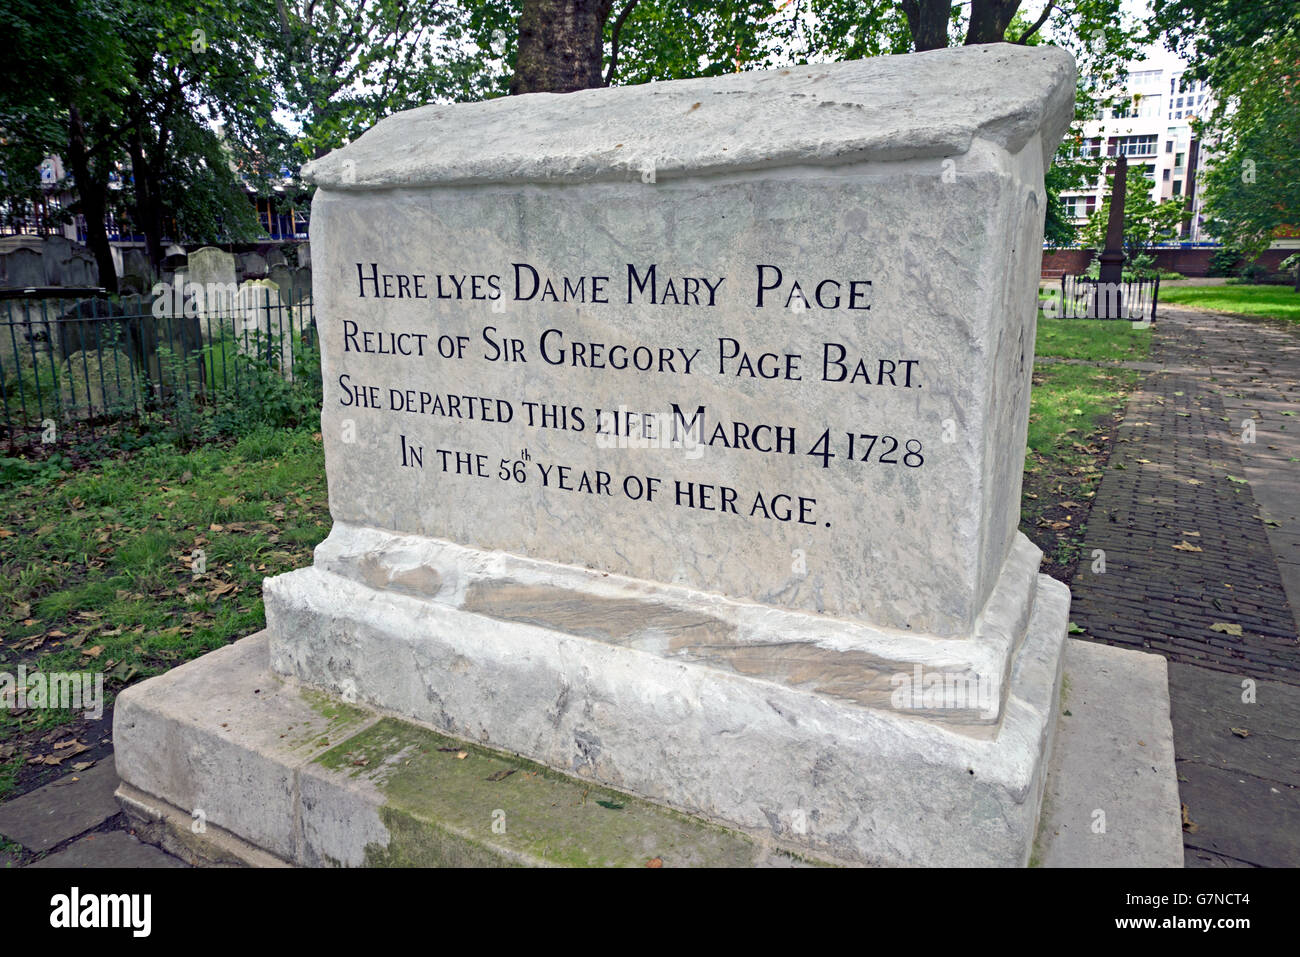 The restored grave of Dame Mary Page in Bunhill Fields Burial Ground, City Road, London, England, UK. Stock Photo